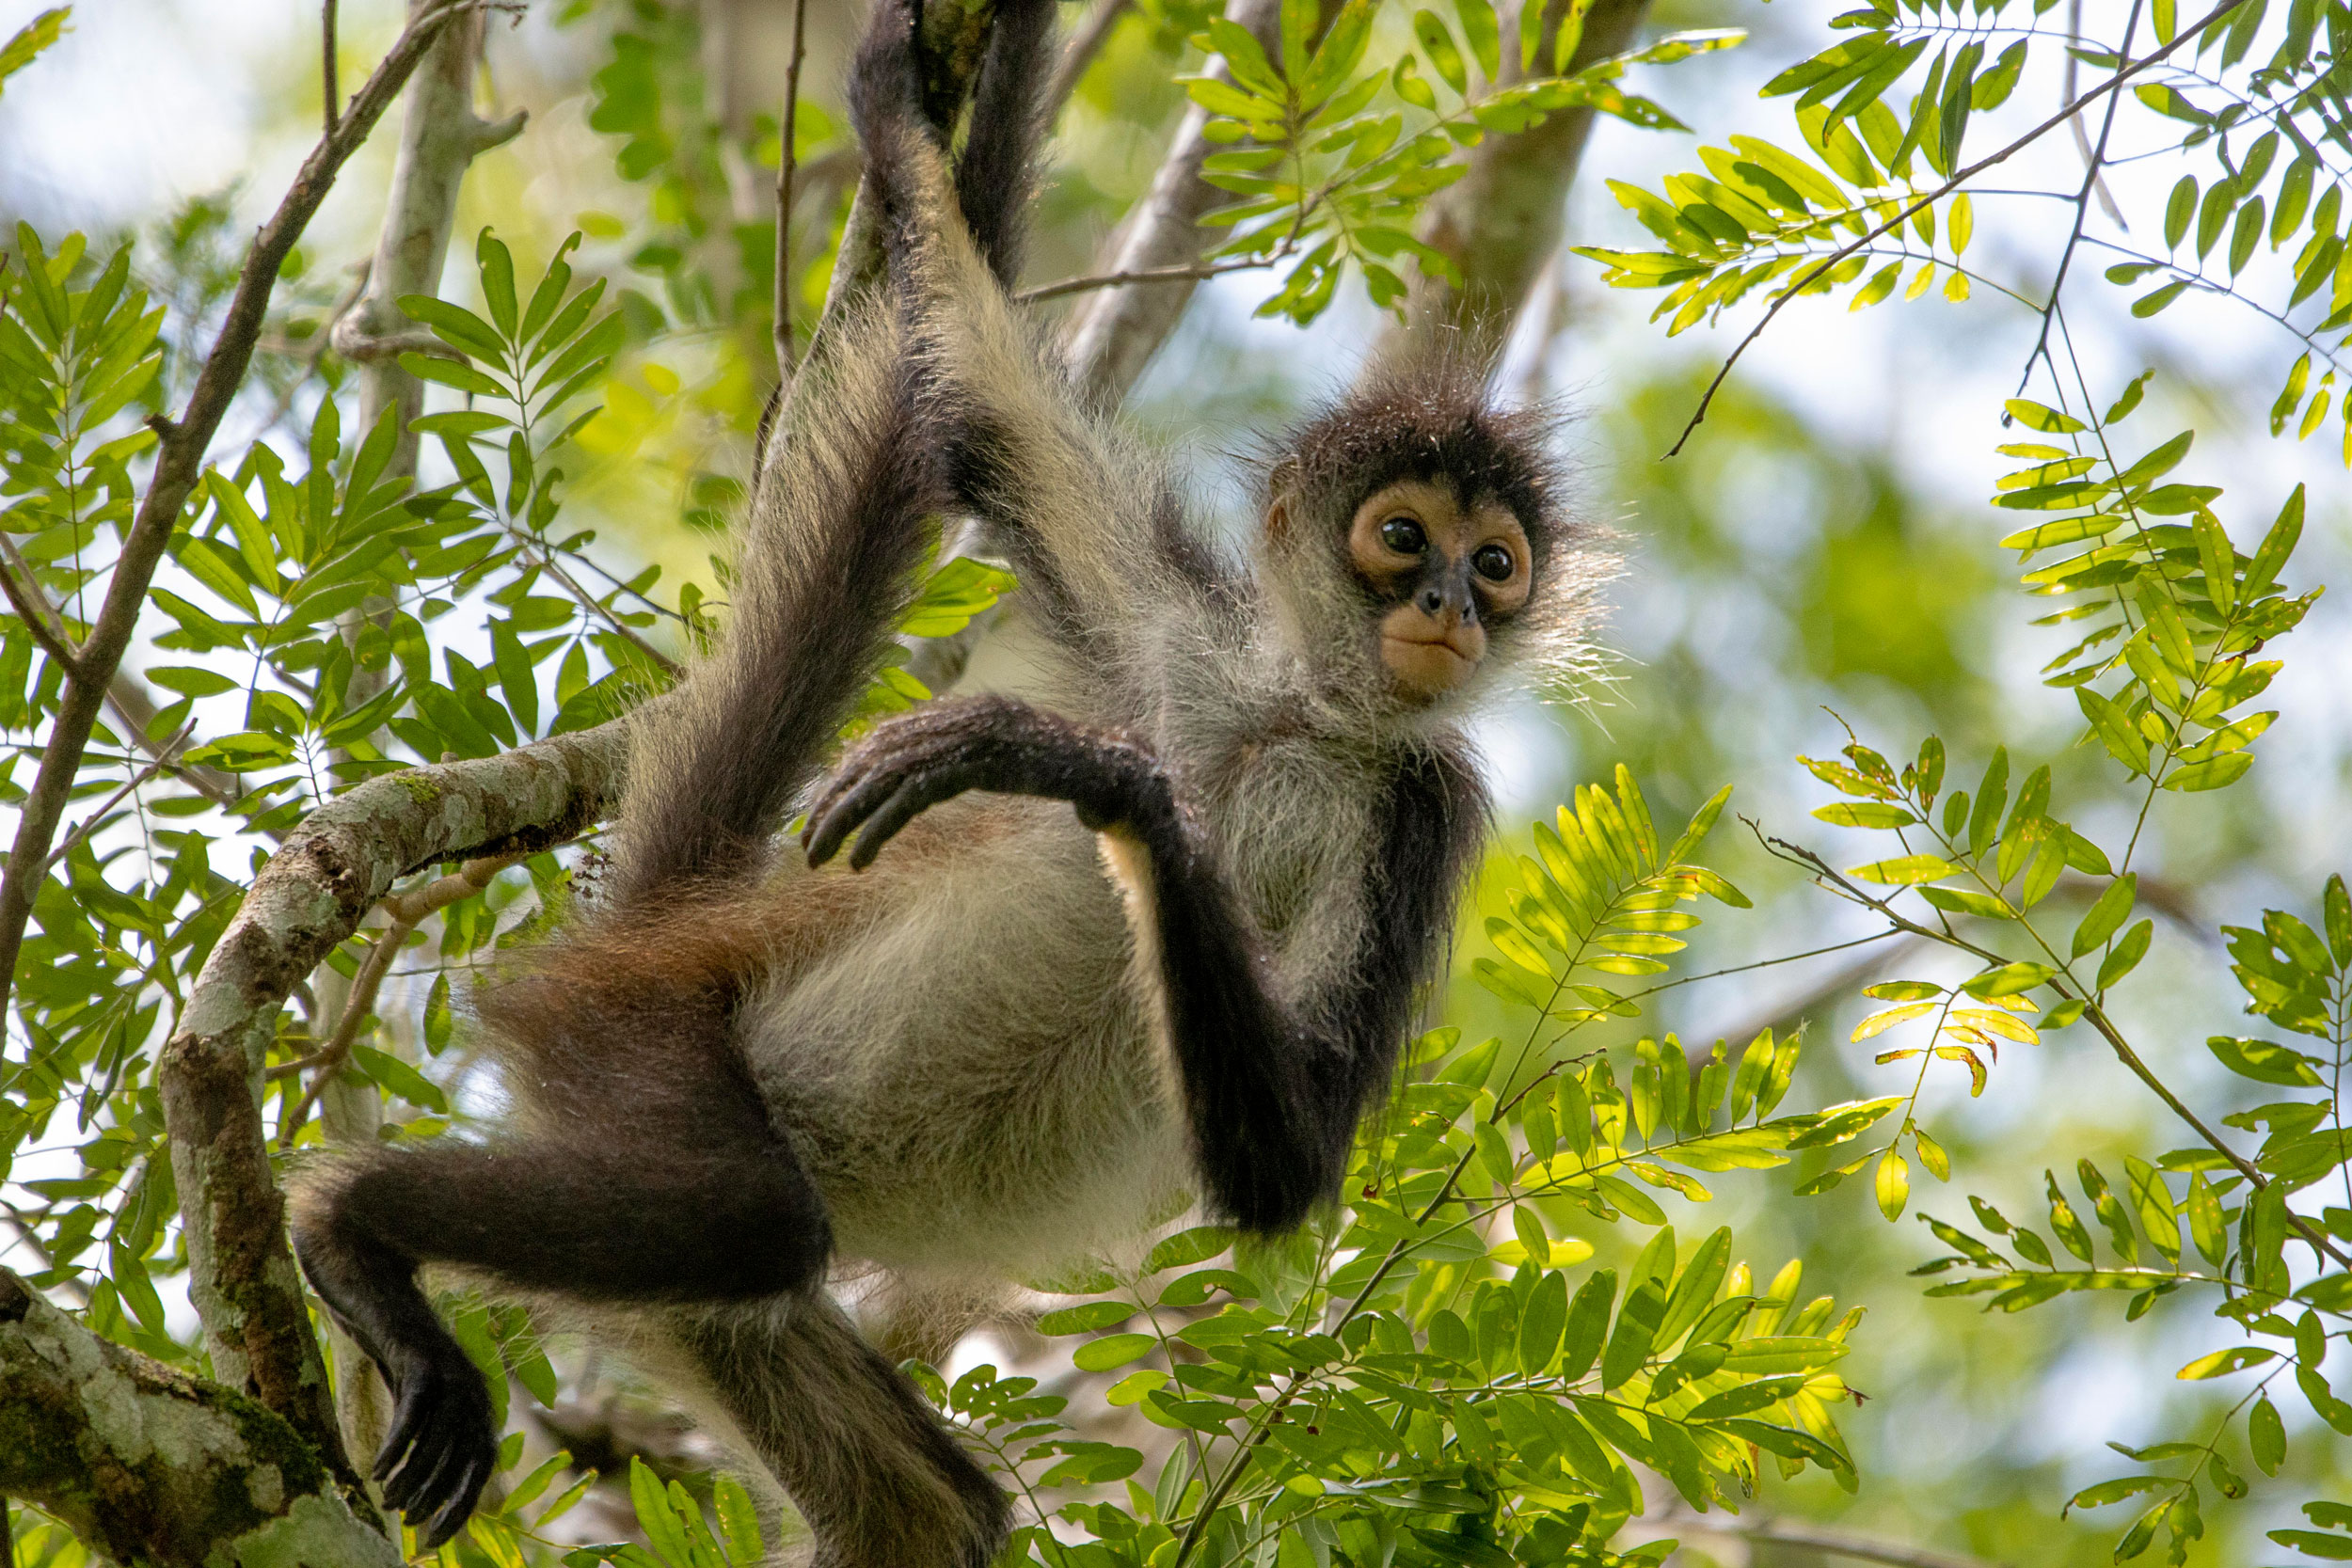 Monkey hanging from a tree branch in Belize rainforest.